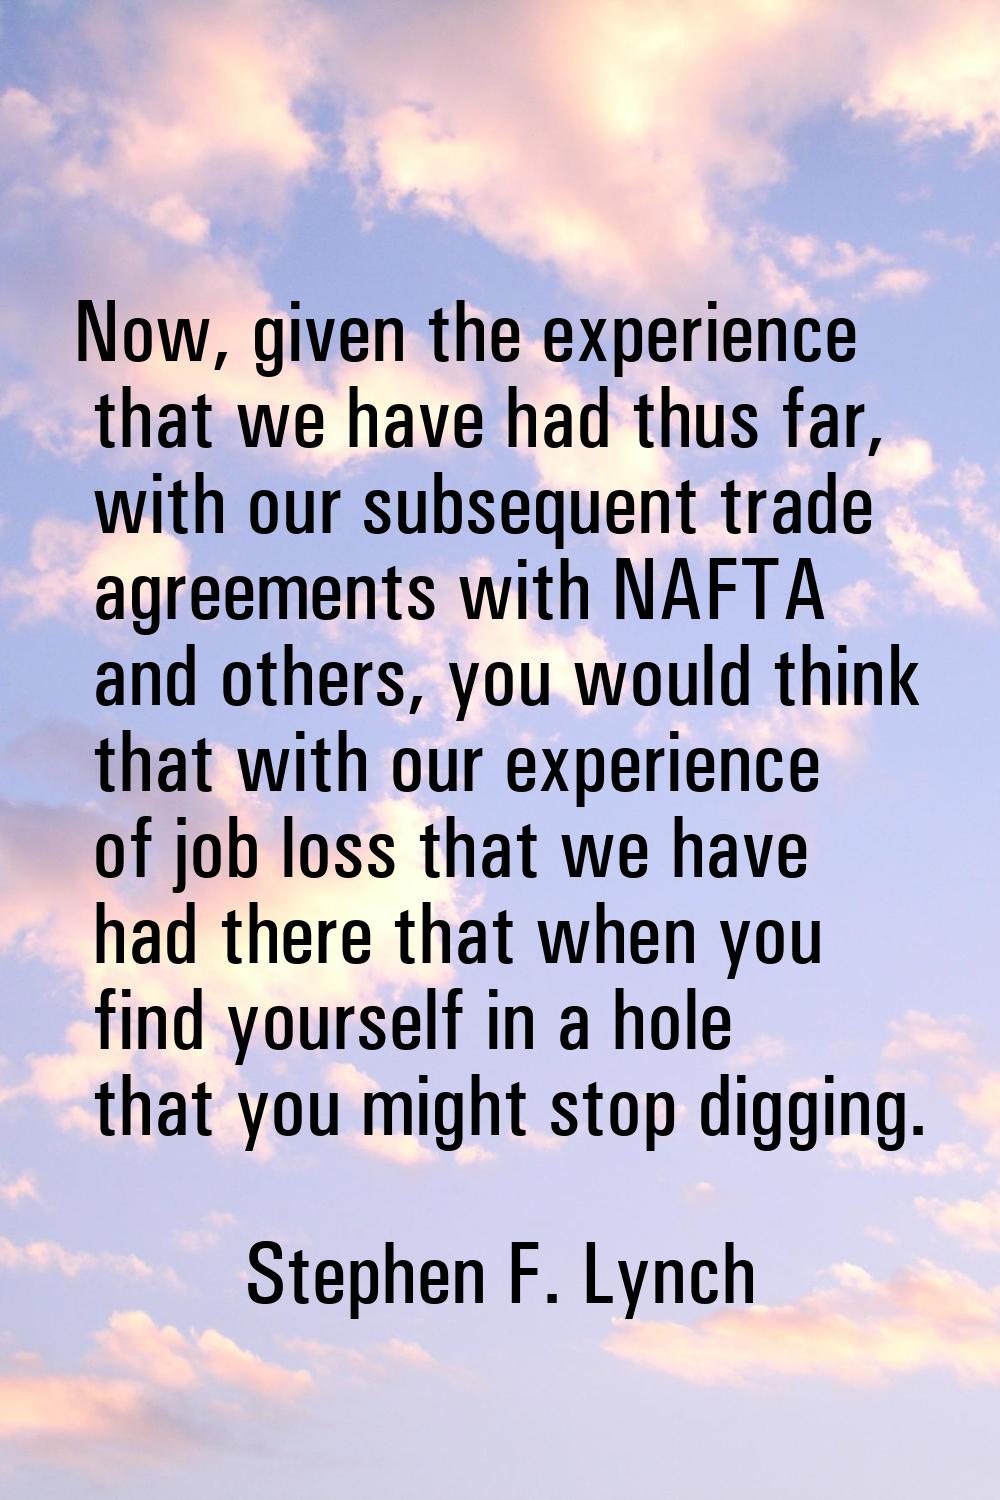 Now, given the experience that we have had thus far, with our subsequent trade agreements with NAFT